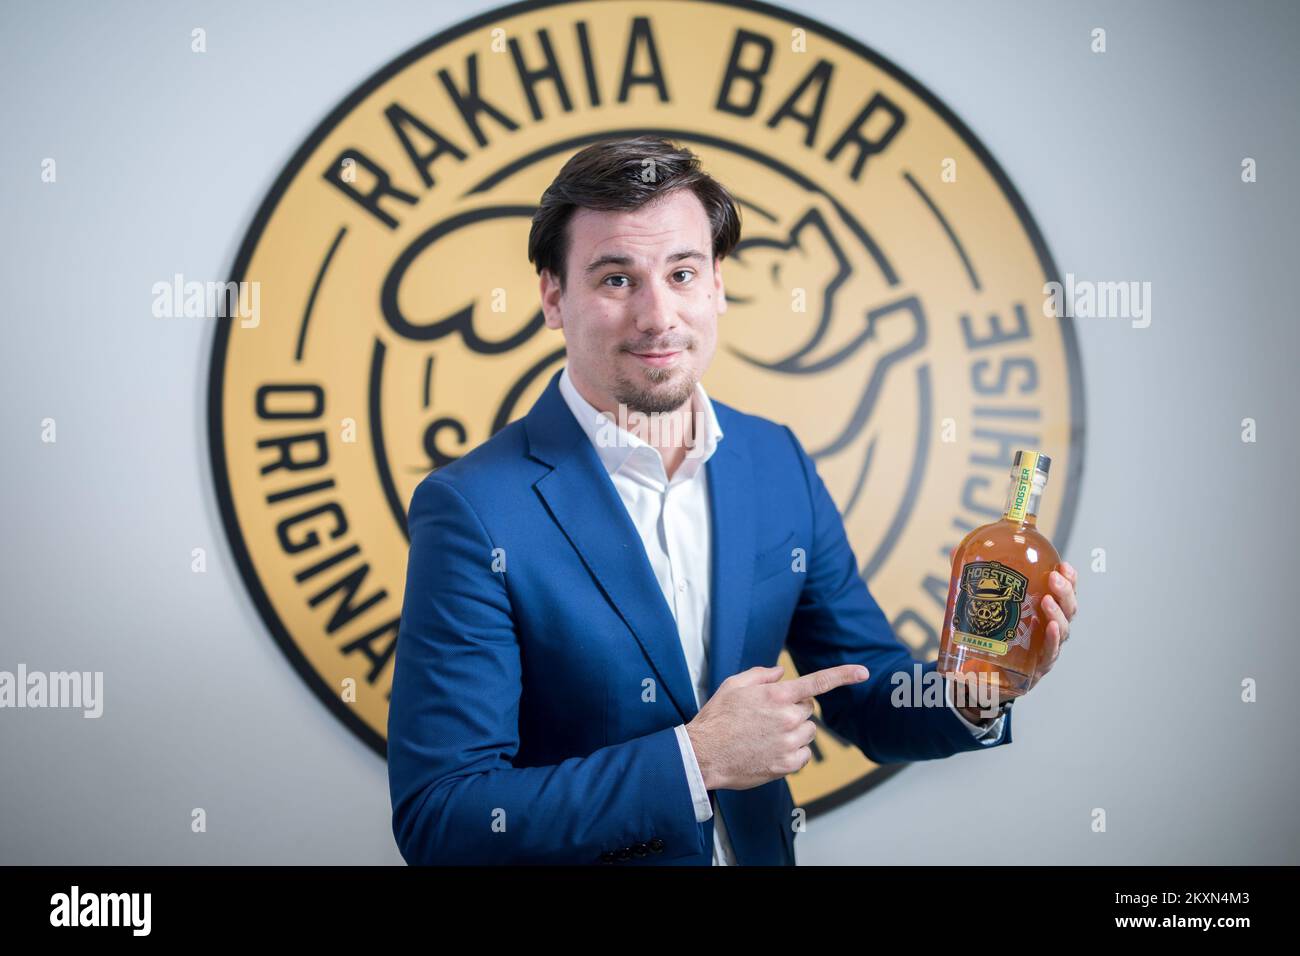 Co-Owner & Director at Rakhia Bar Franchise Matija Blazevic in Rijeka, Croatia on March 3, 2021. Rakhia Bar is the first brandy in the world to develop a franchise model. Through years of work, they have developed a specialized offer of one hundred types of brandy, which they decided to complete with their own line - The Hogster. Raw materials are procured from Croatian orchards, and brandies are produced in cooperation with two producers from the local area, according to recipes that they have been developing for more than six months. Photo: Nel Pavletic/PIXSELL Stock Photo